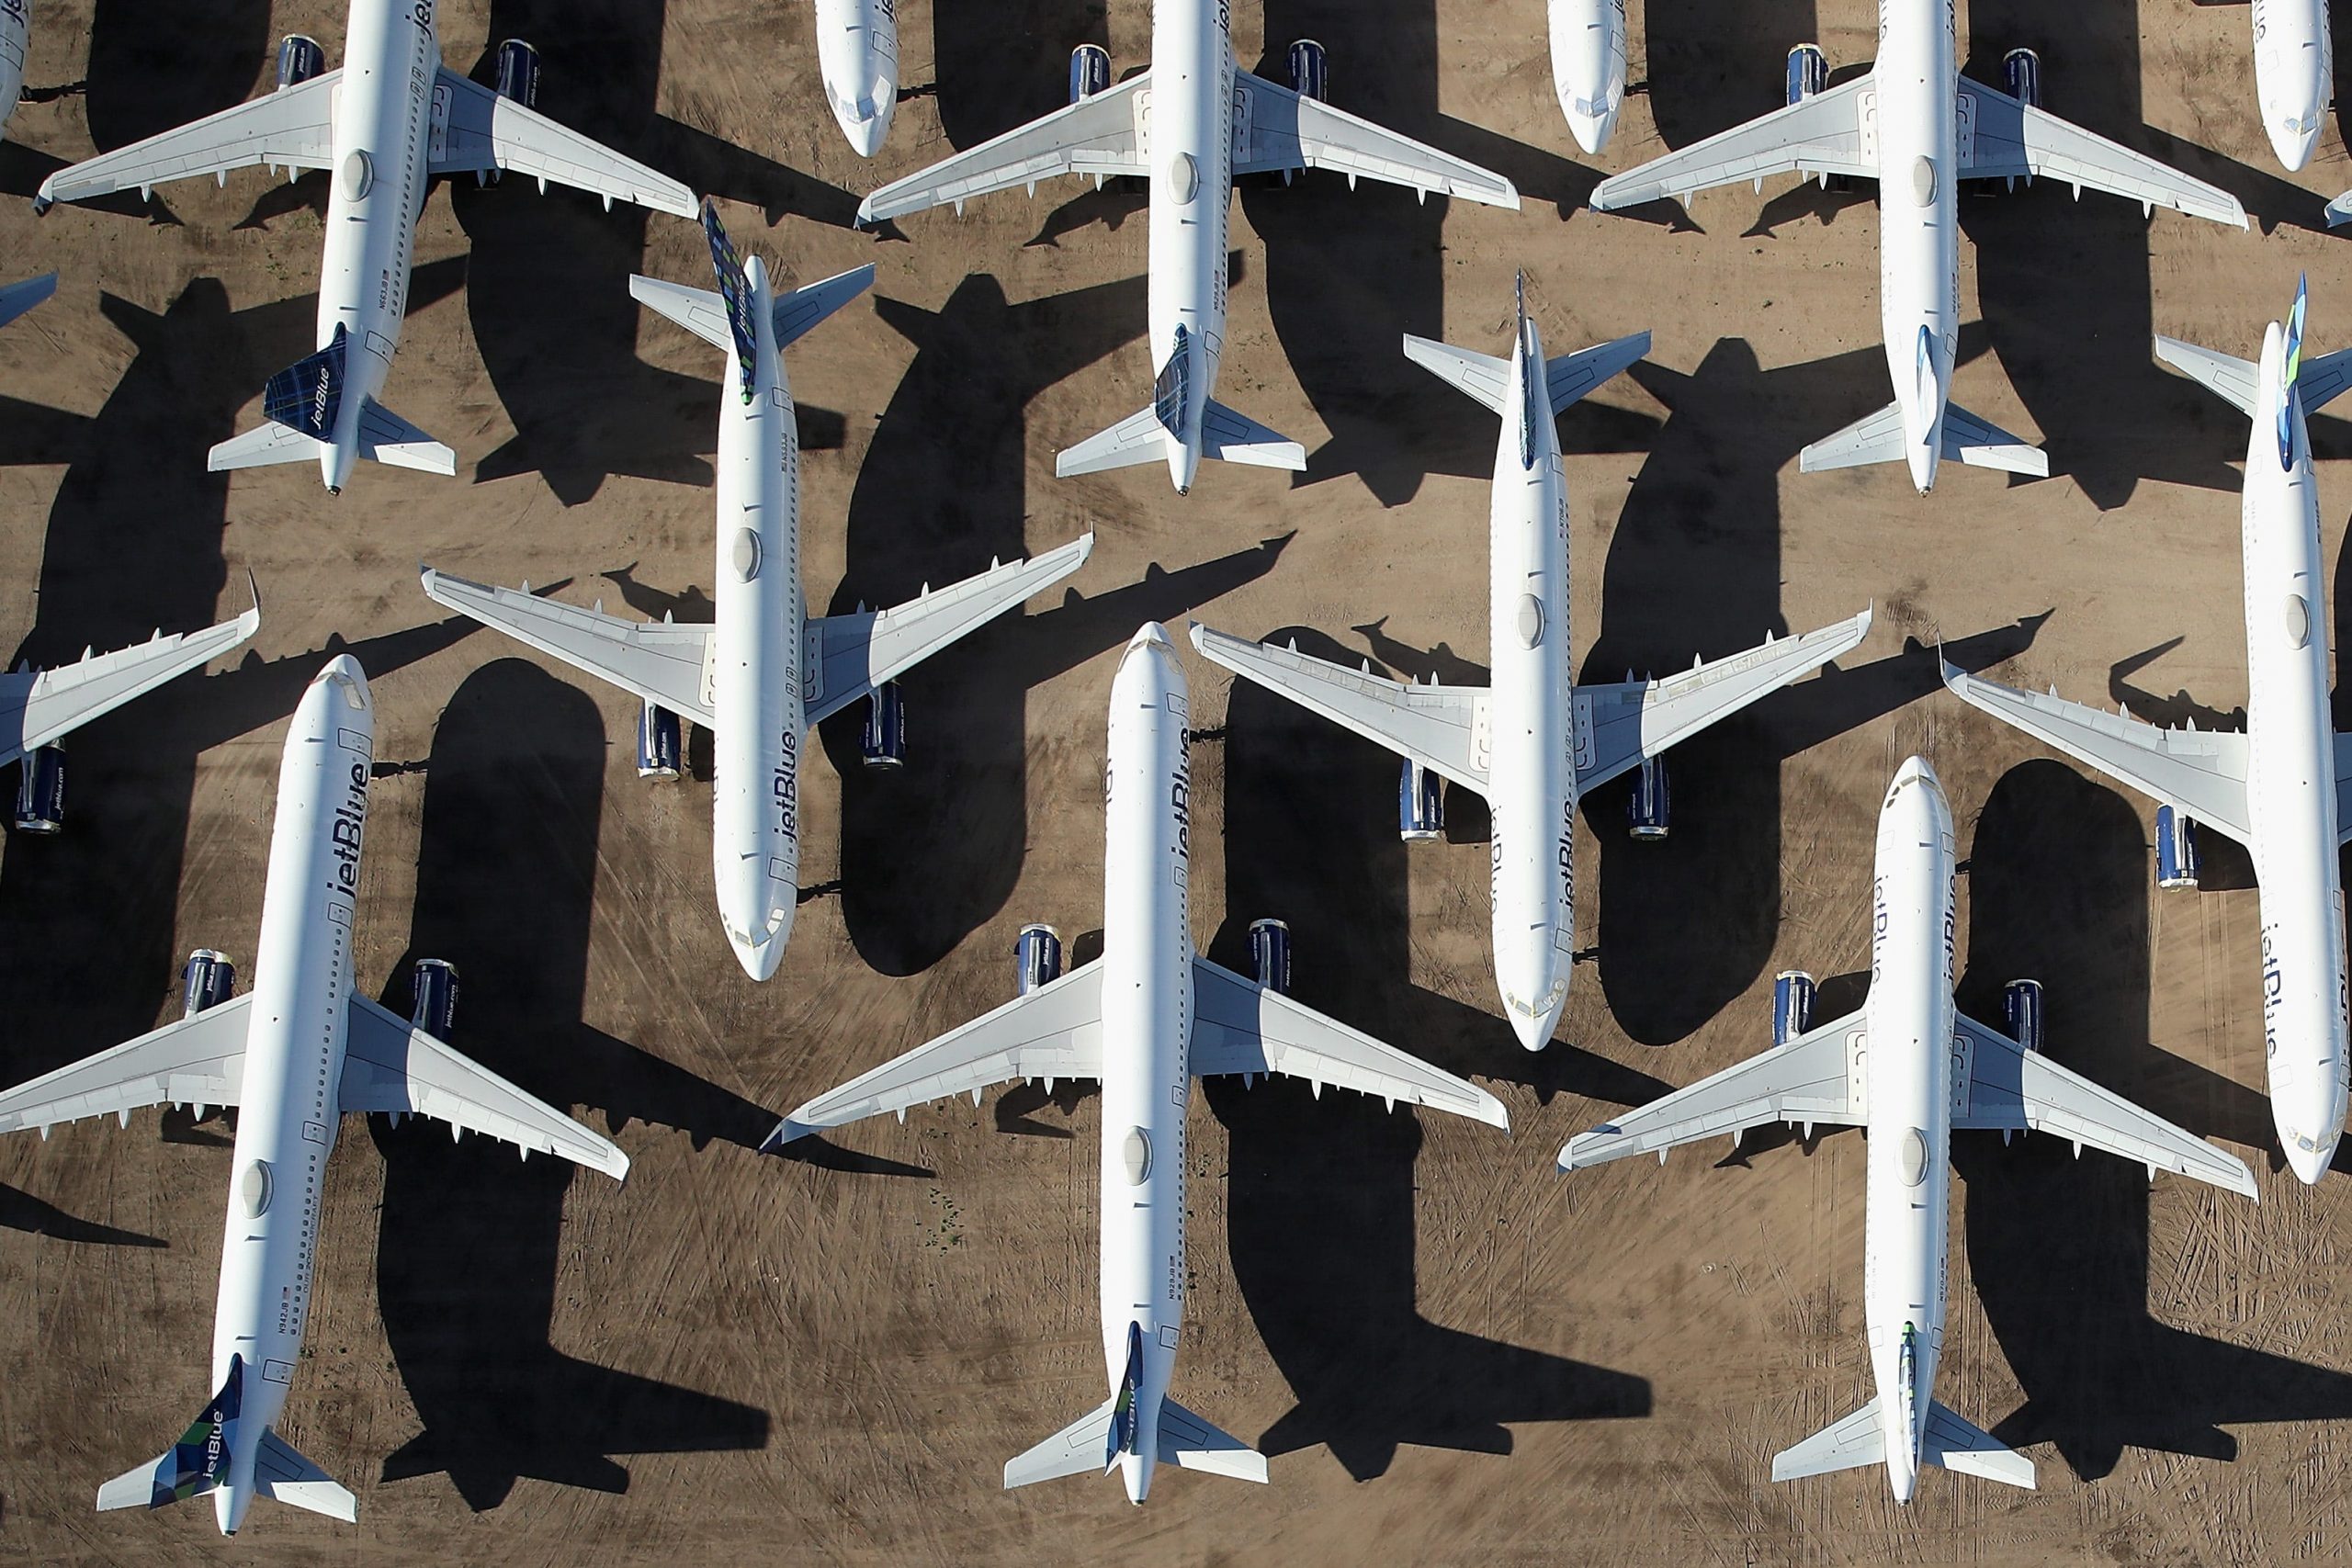 JetBlue planes are seen from above on a tarmac in Arizona in an interlocked pattern